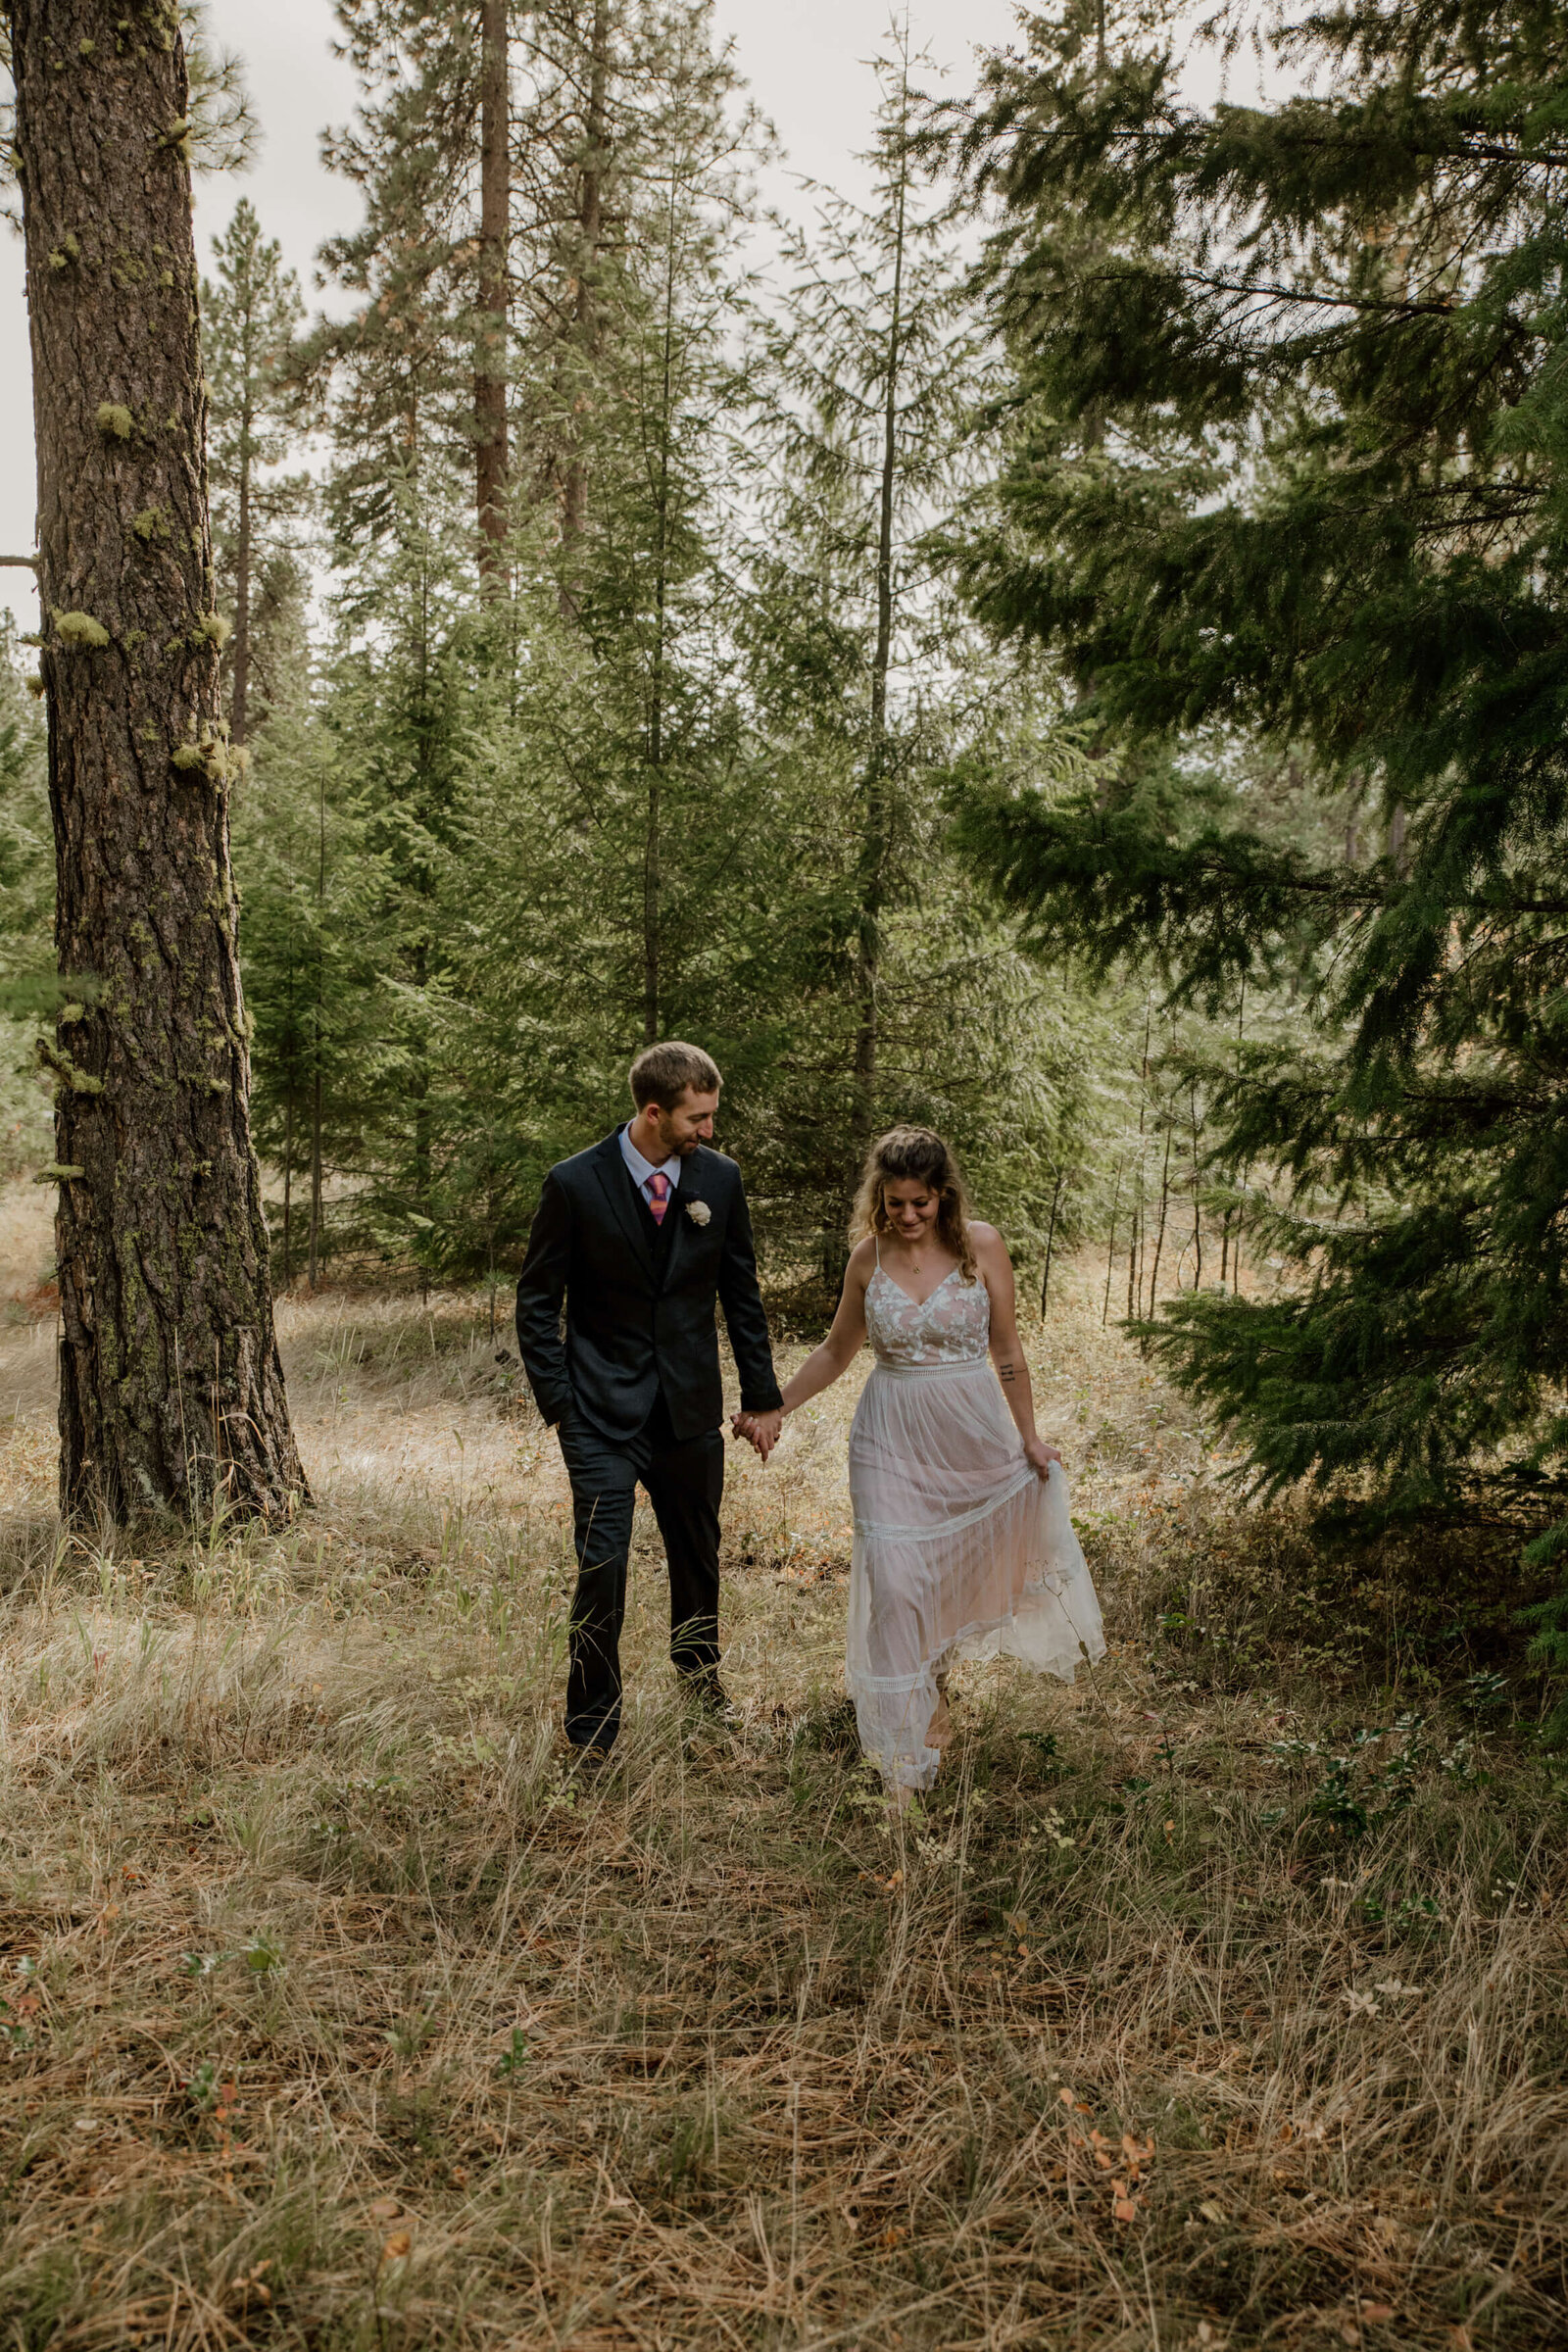 Bride and Groom walking in forest.